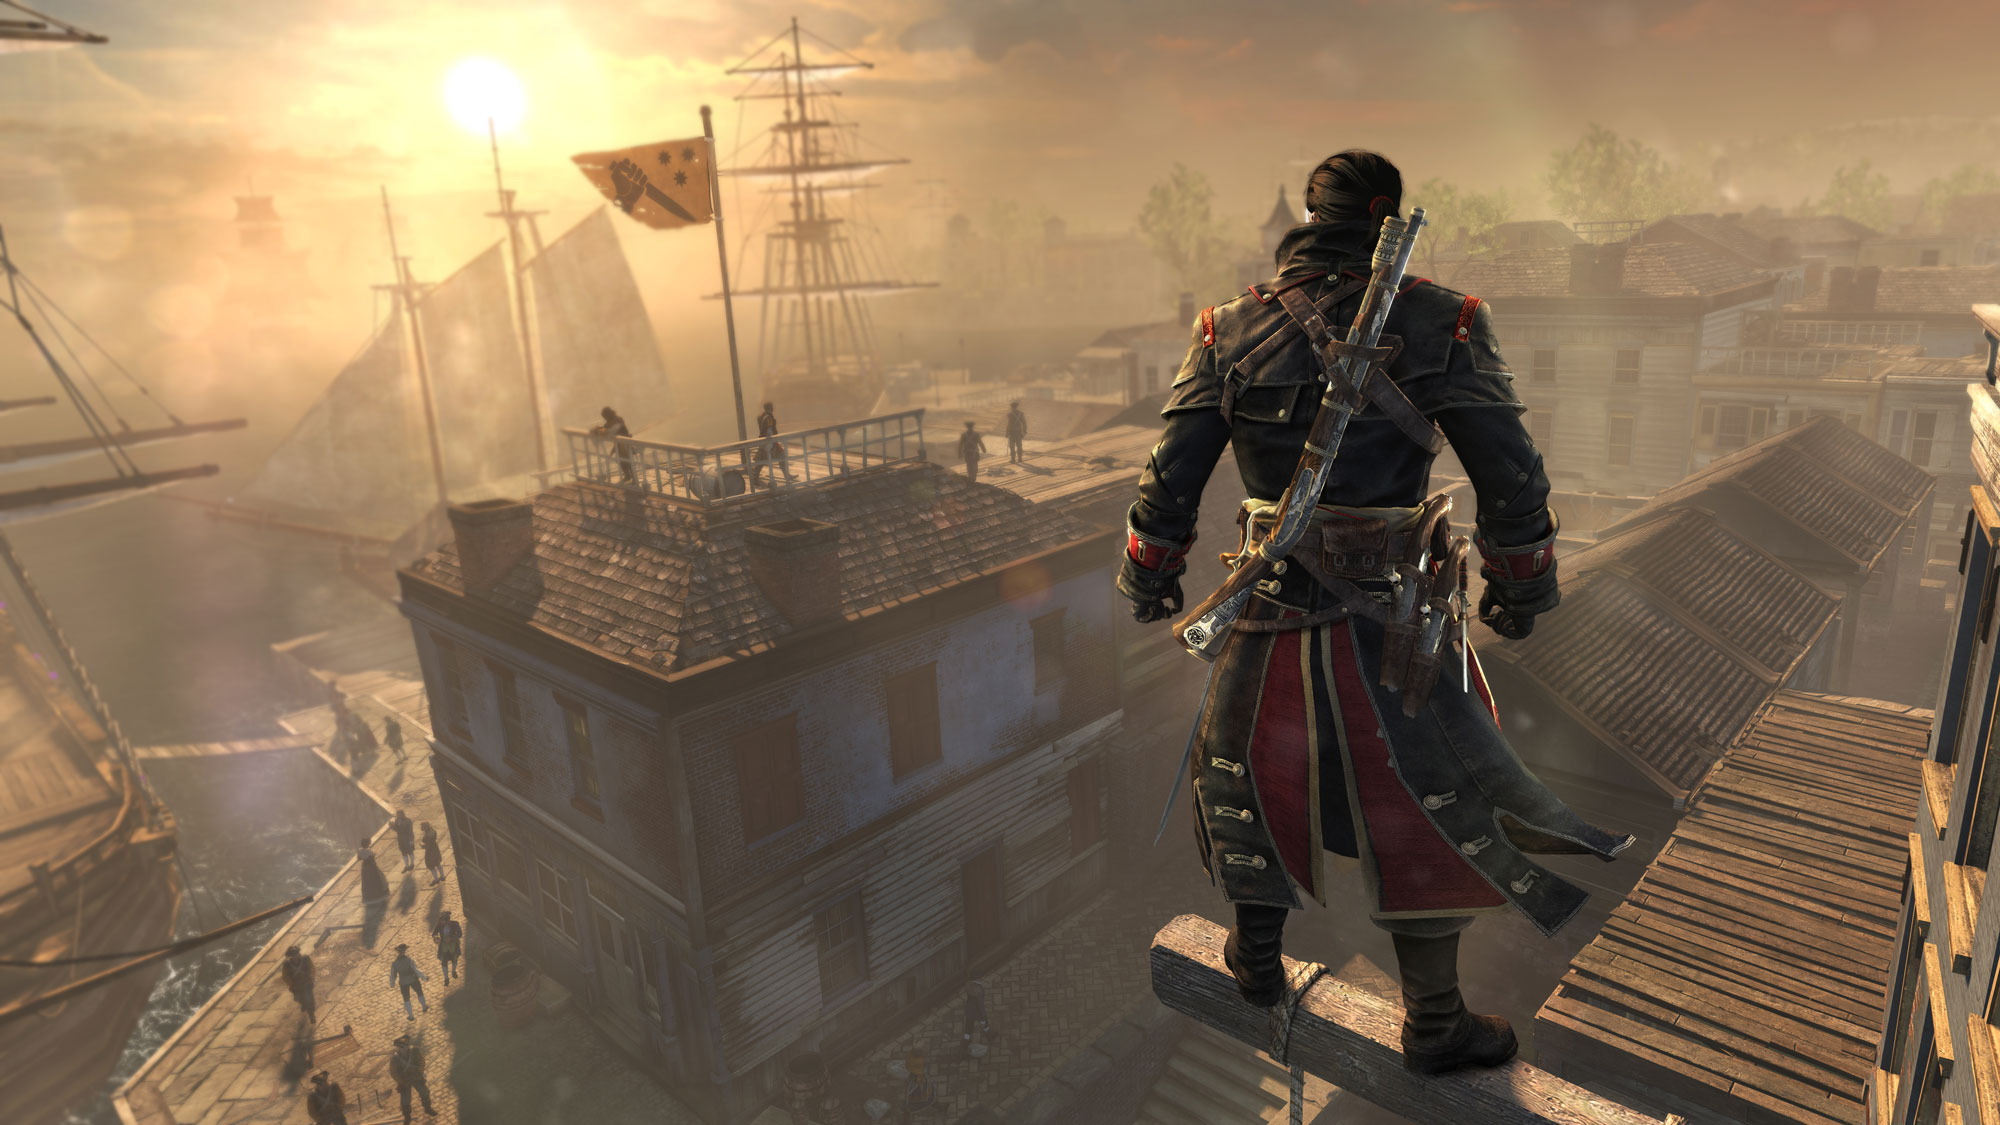 Why Is “Assassin’s Creed Rogue” Not Coming to Current Generation Consoles? - Ubisoft Wants to Split Gamers on Their Platform Preference This Year